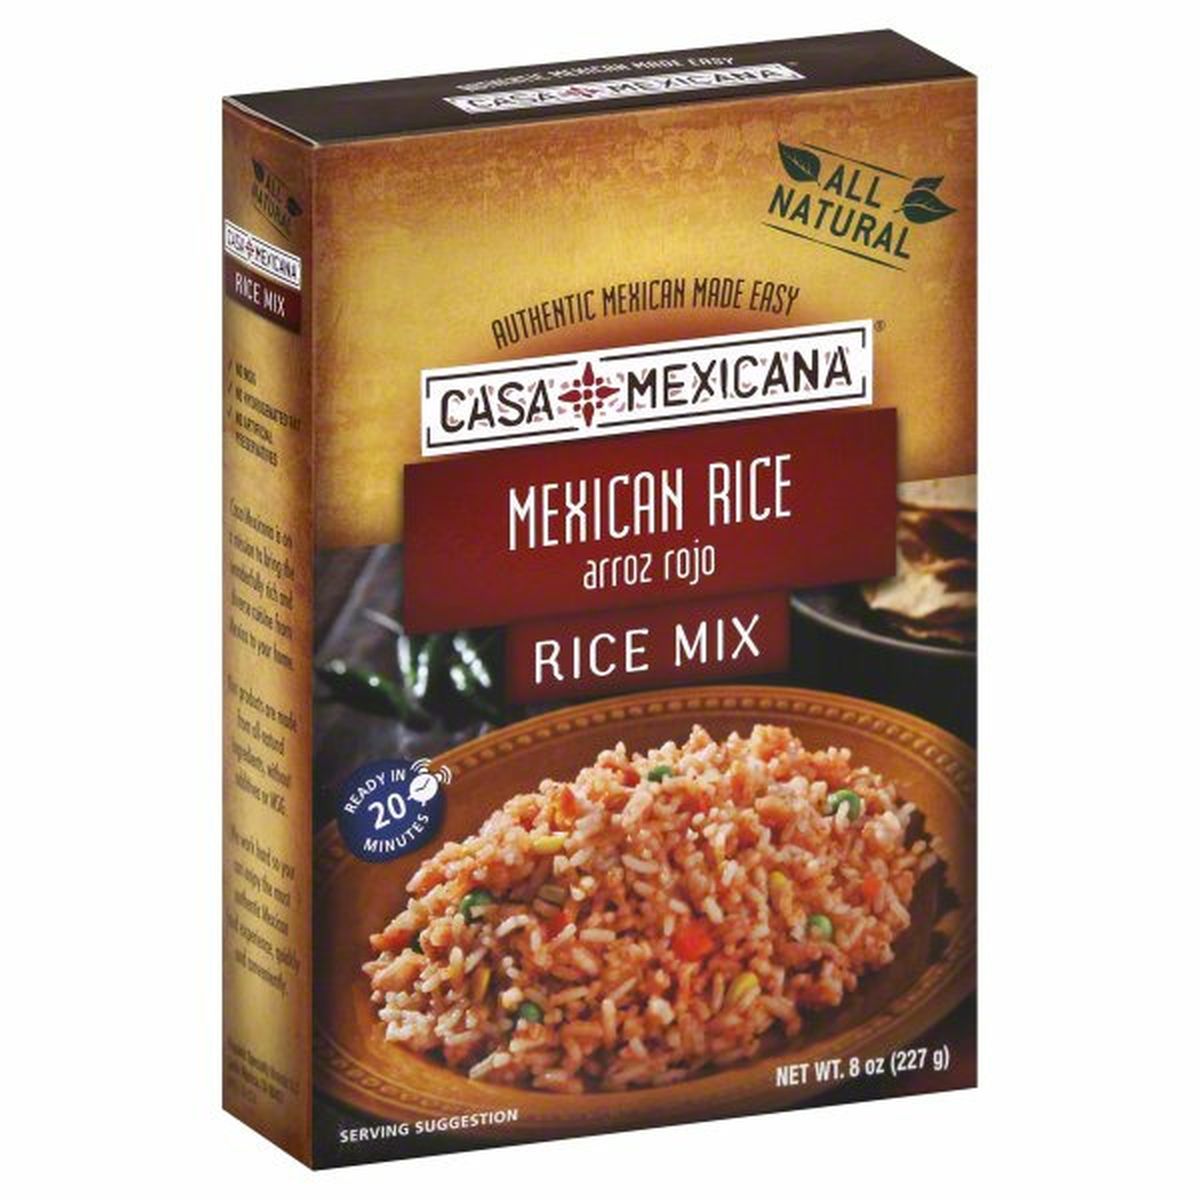 Calories in Casa Mexicana Rice Mix, Mexican Rice